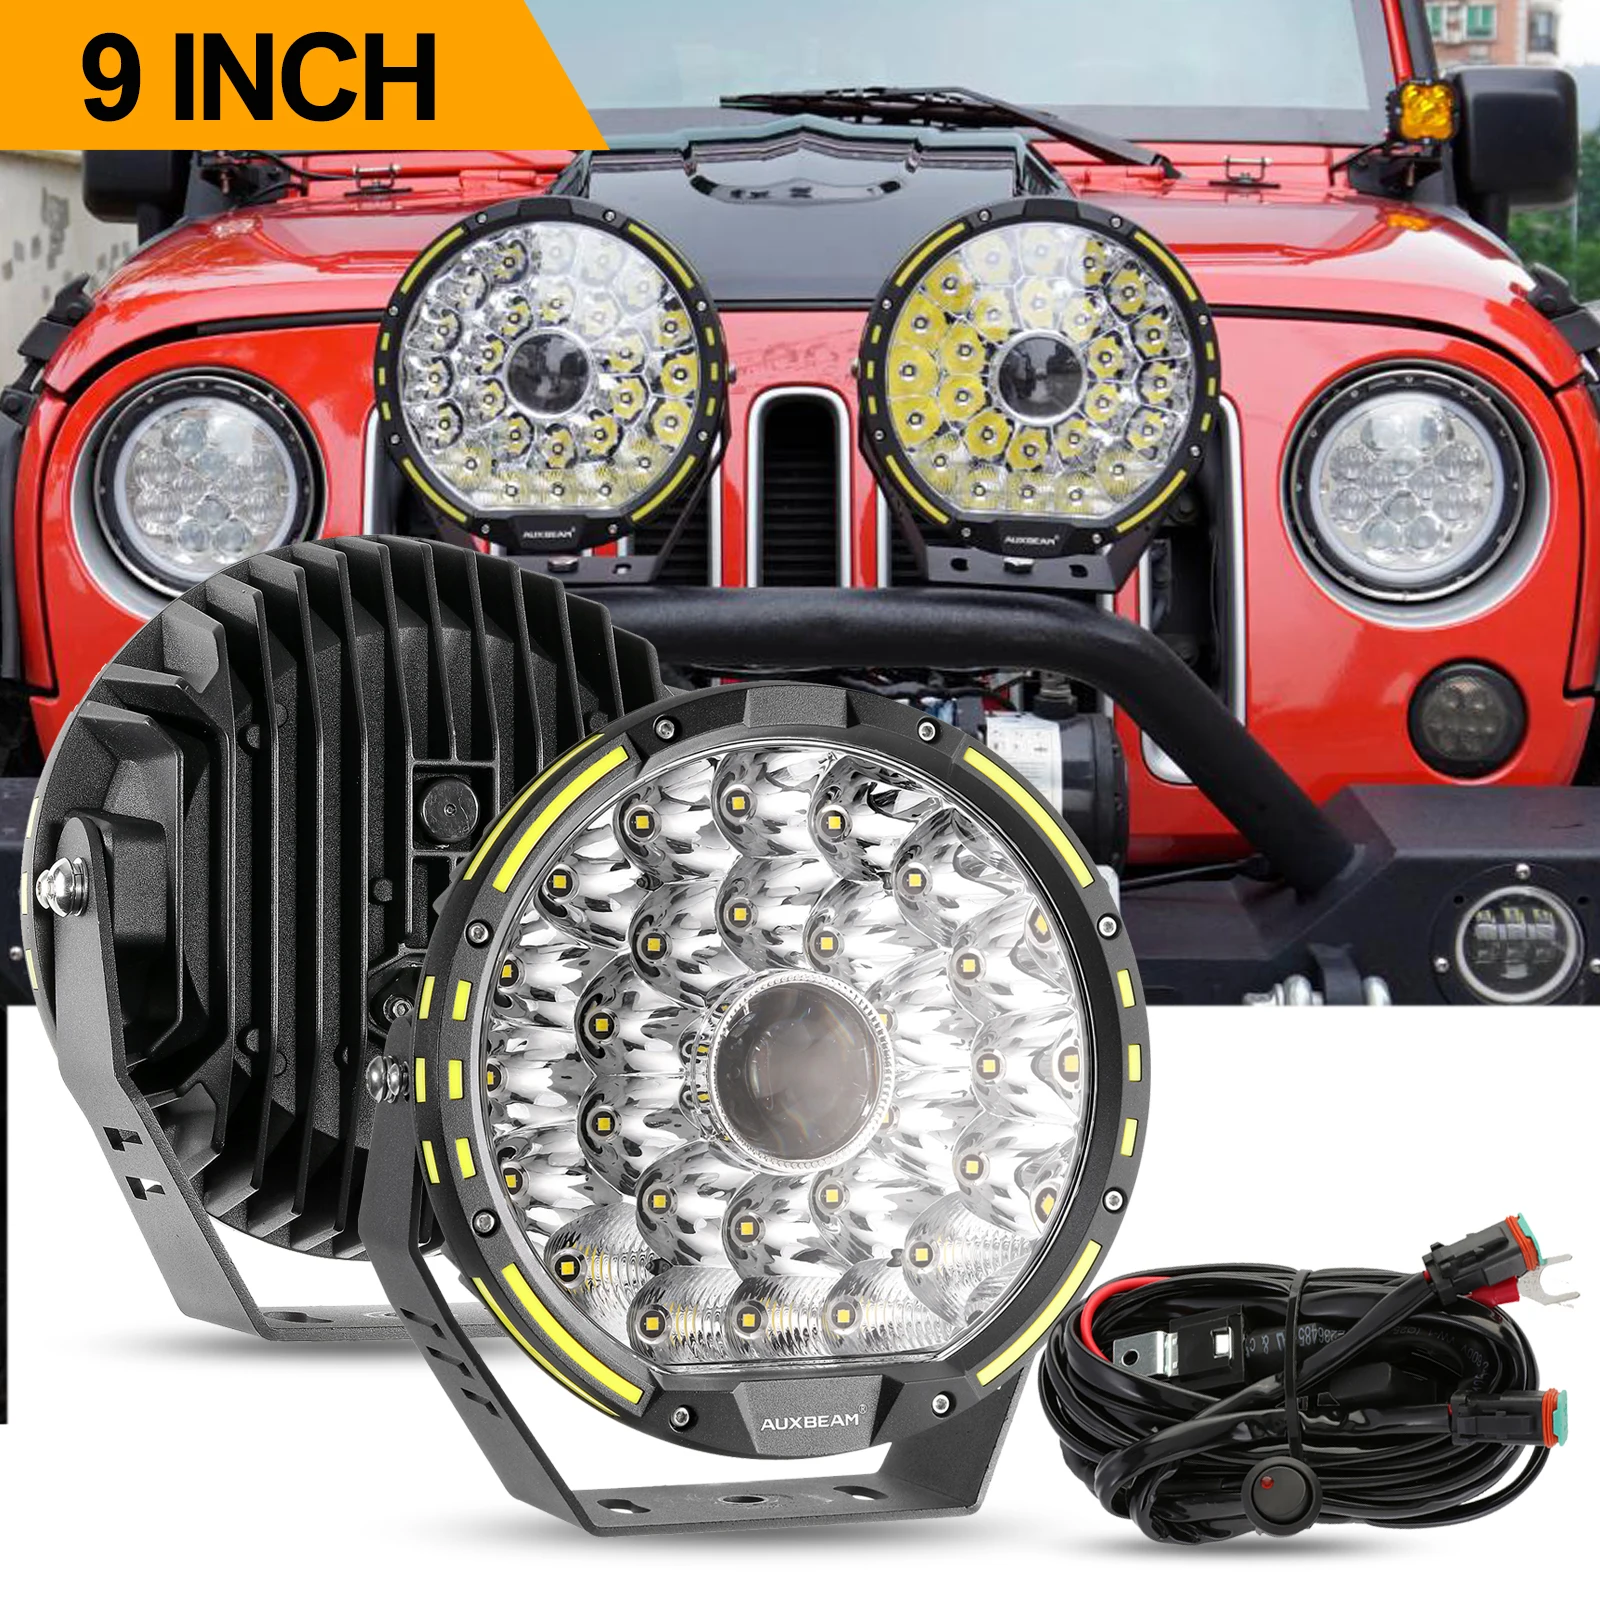 

Auxbeam 1 Pair 270W LED Work Light 9 inch Round Spot Light Shock-proof IP68 Waterproof 6000K Projector Lamp with Harness Kit